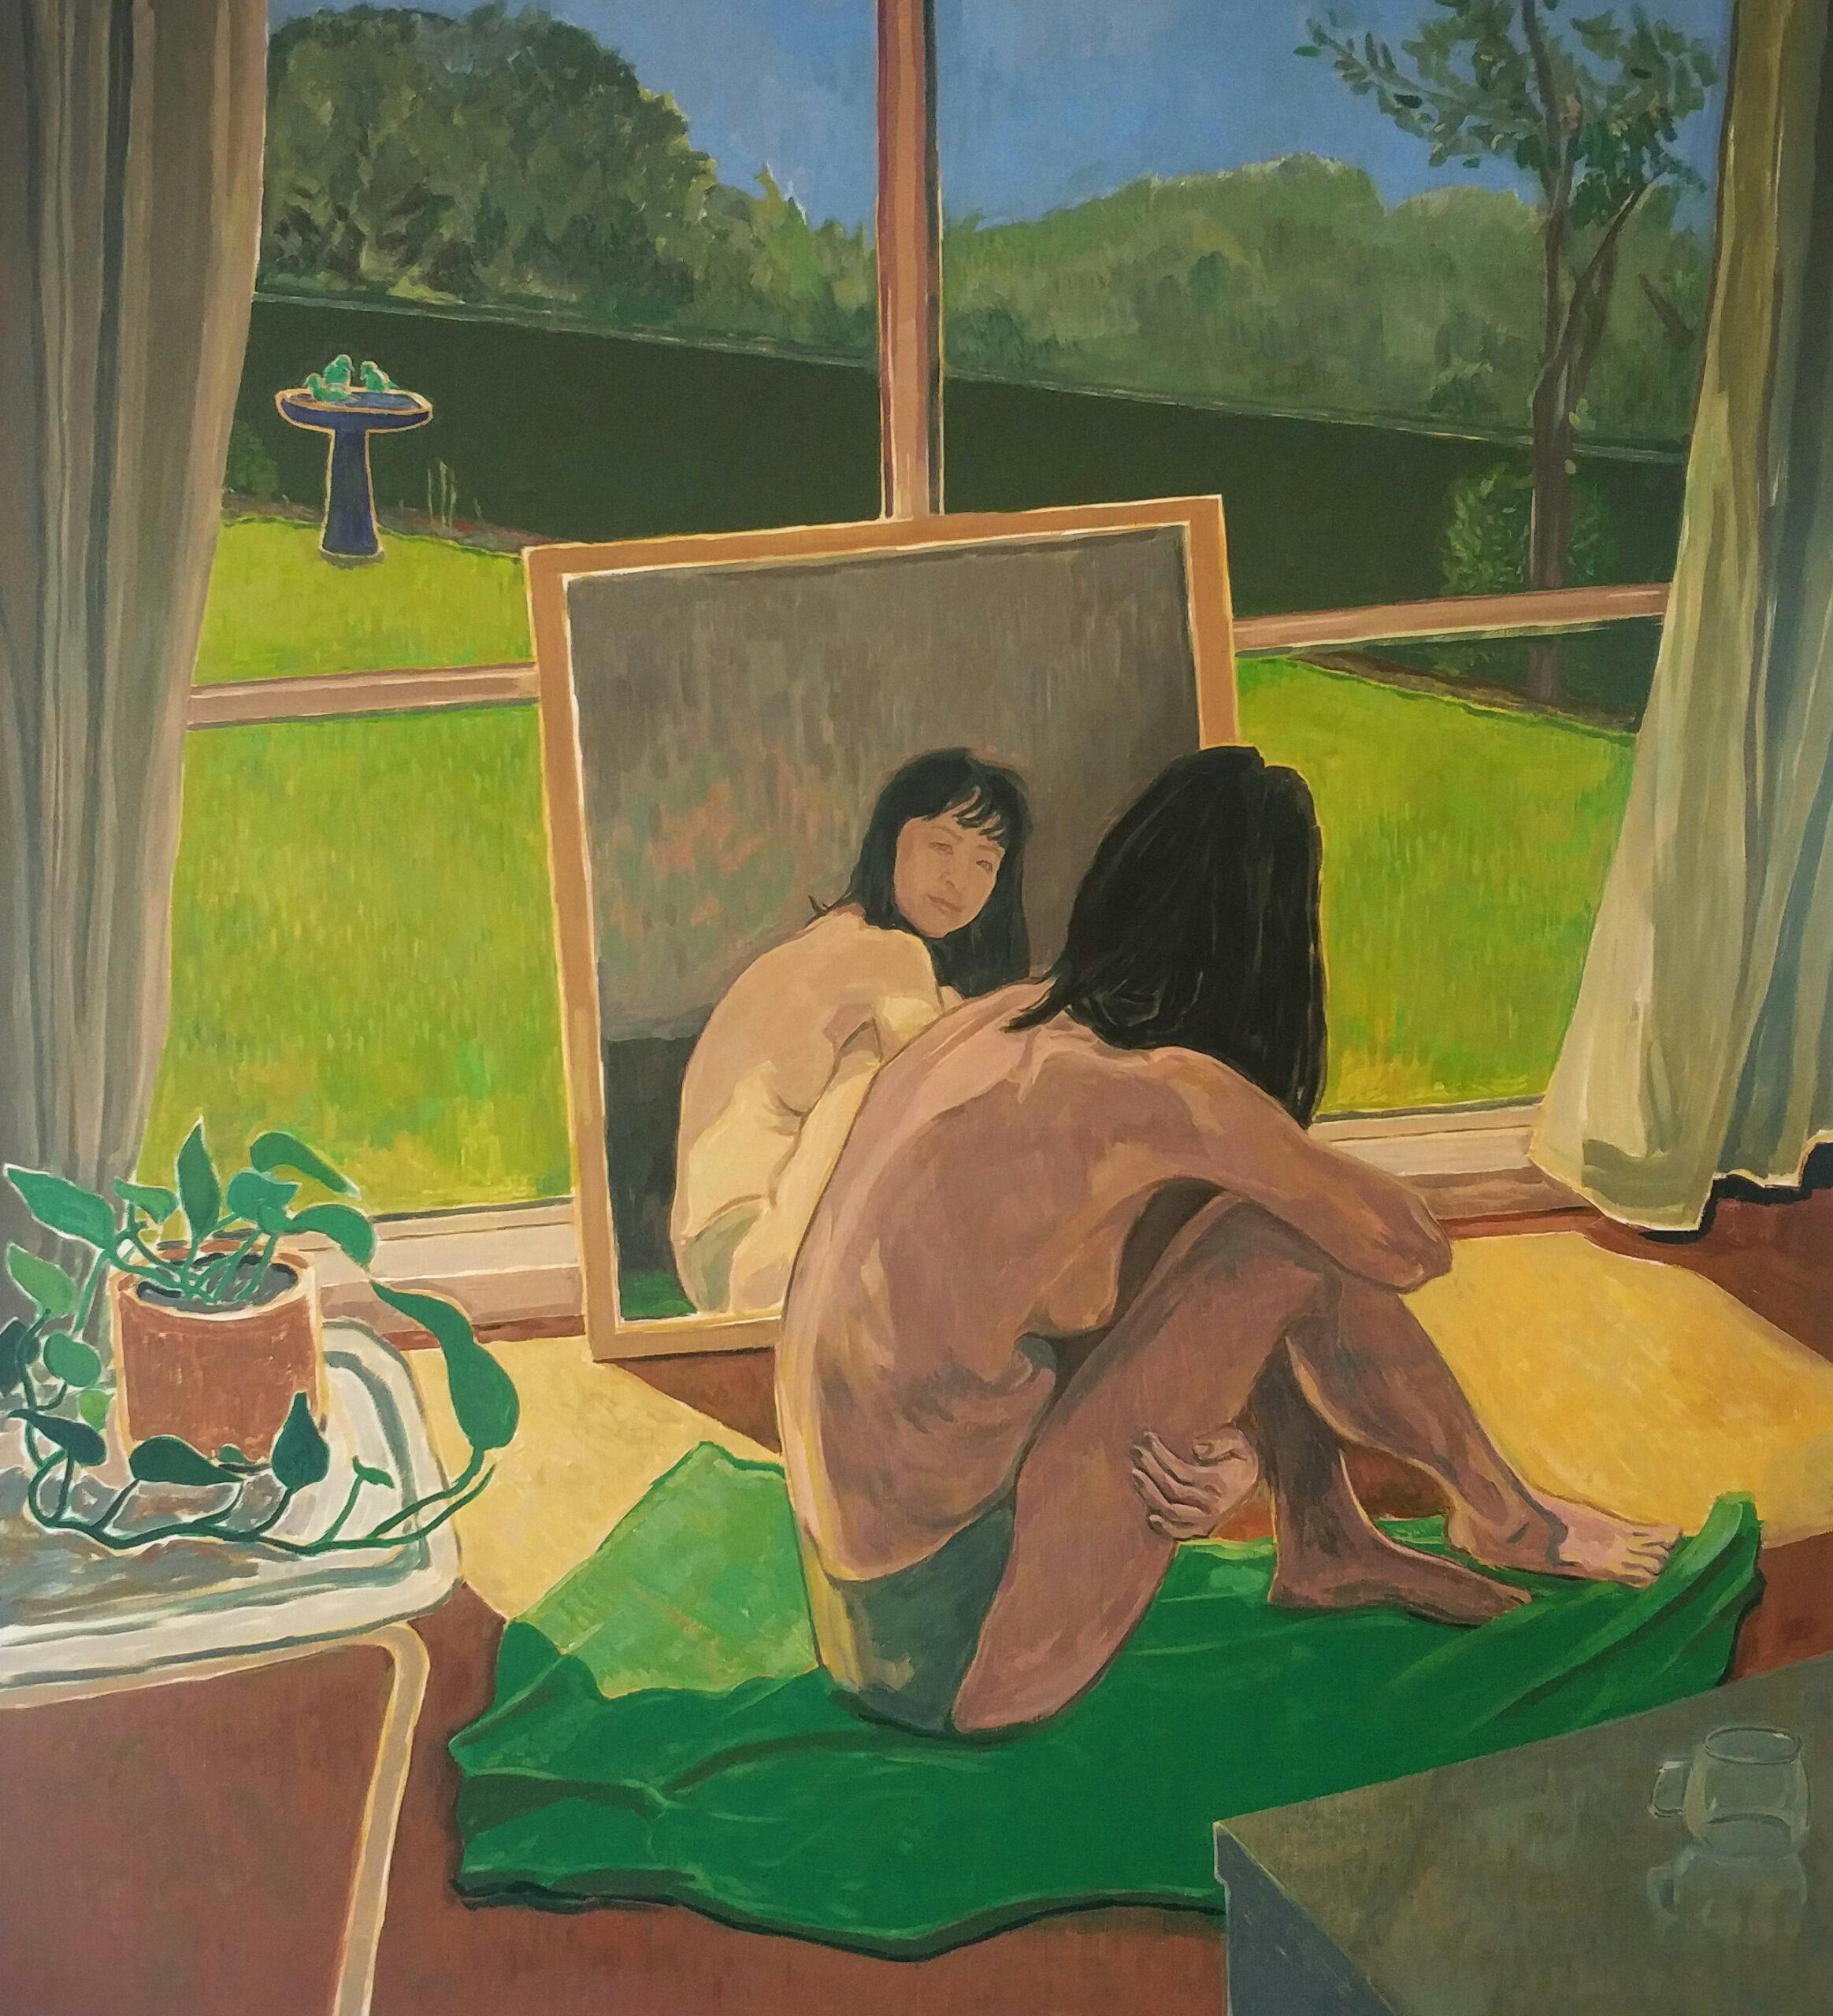 Dayan J, Livingroom in the Afternoon, 110x100cm, Oil on Linen